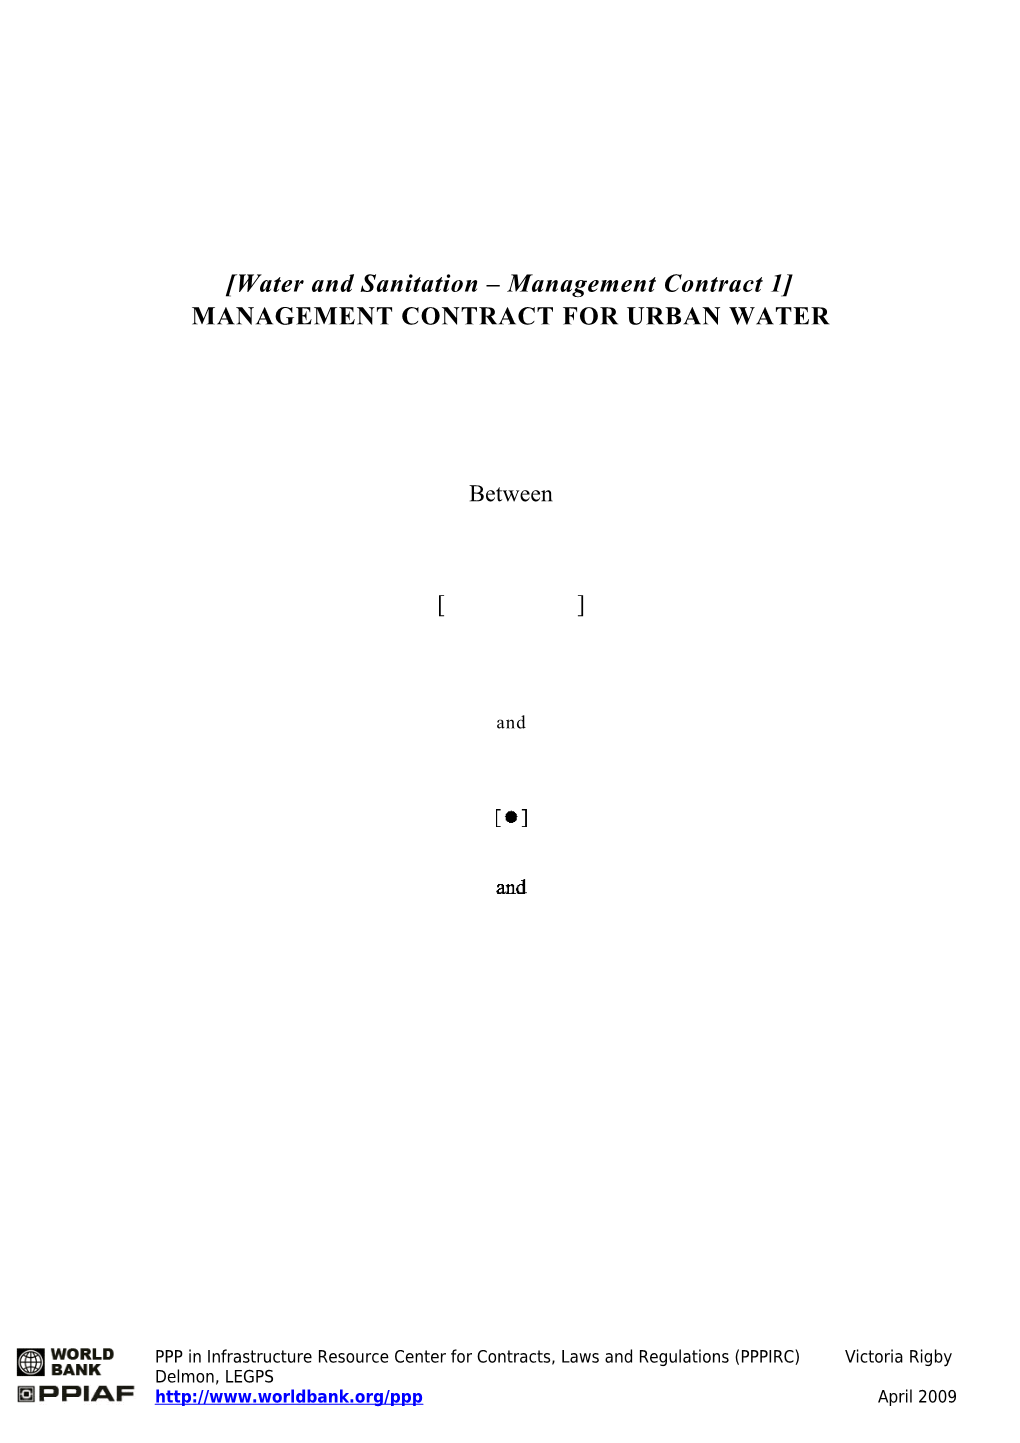 Water and Sanitation Management Contract 1